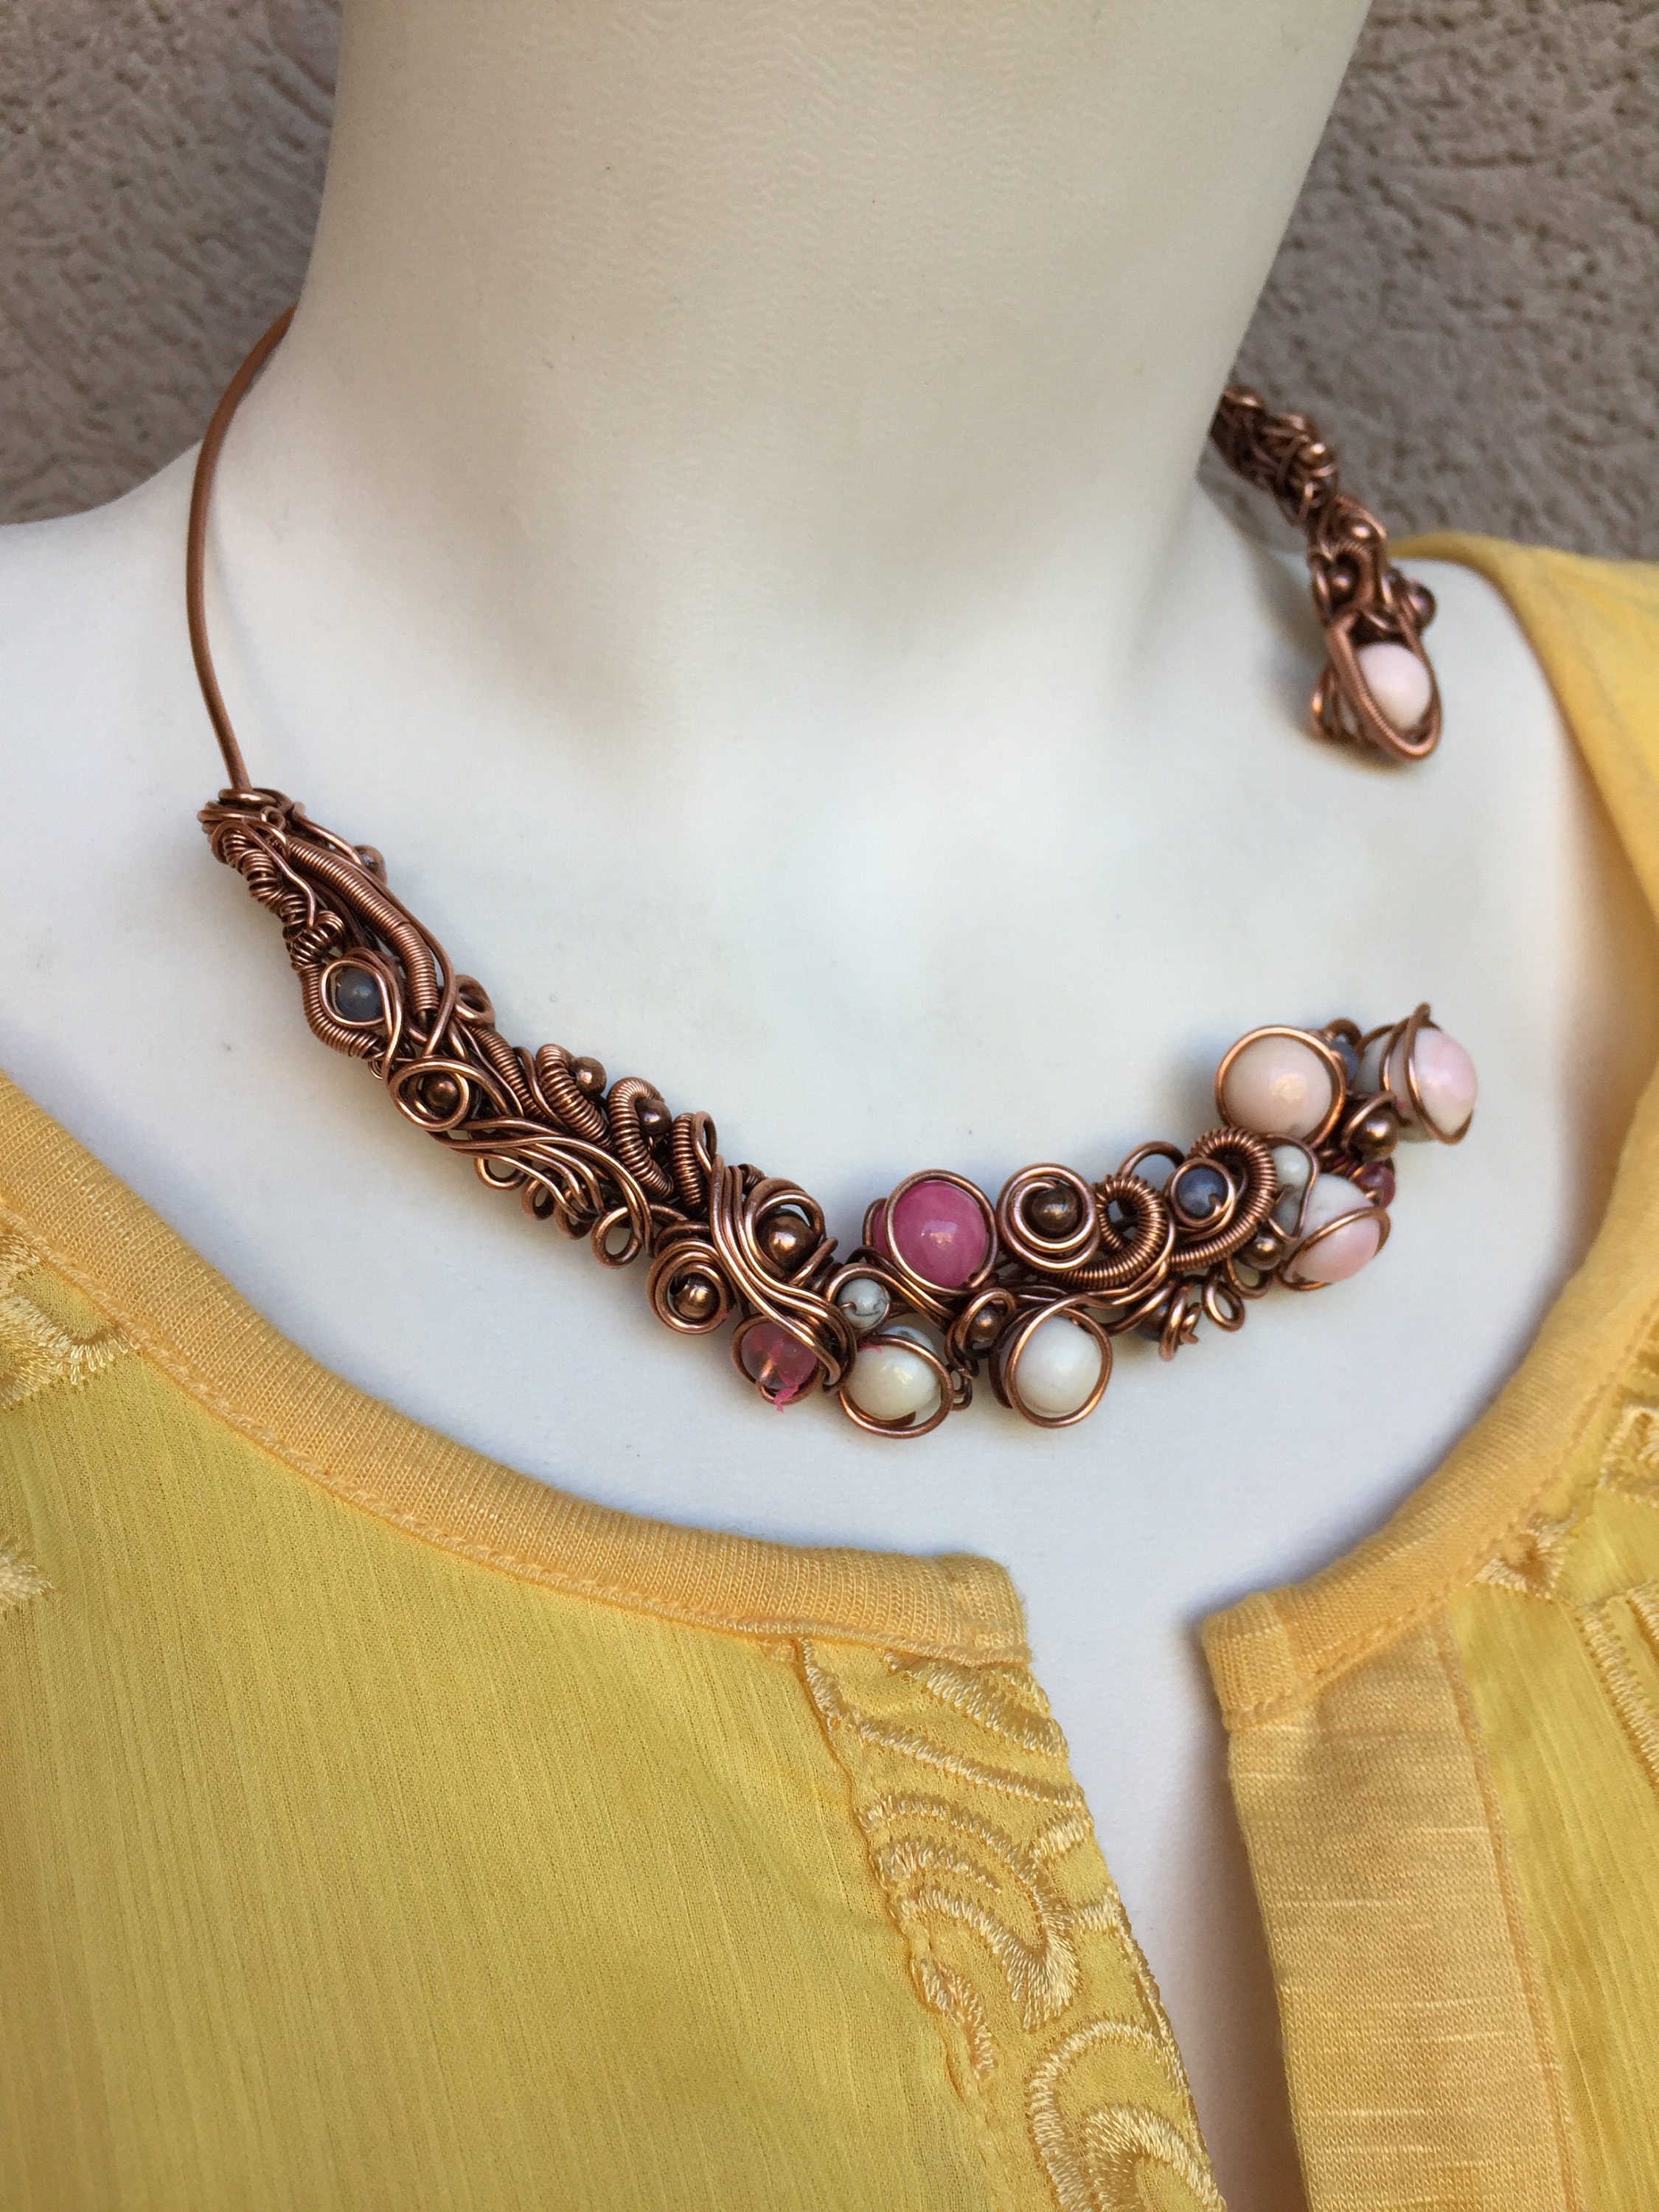 Handmade Necklace of Rose Agate Stone and Copper. Wire Wrapped Jewelry ...